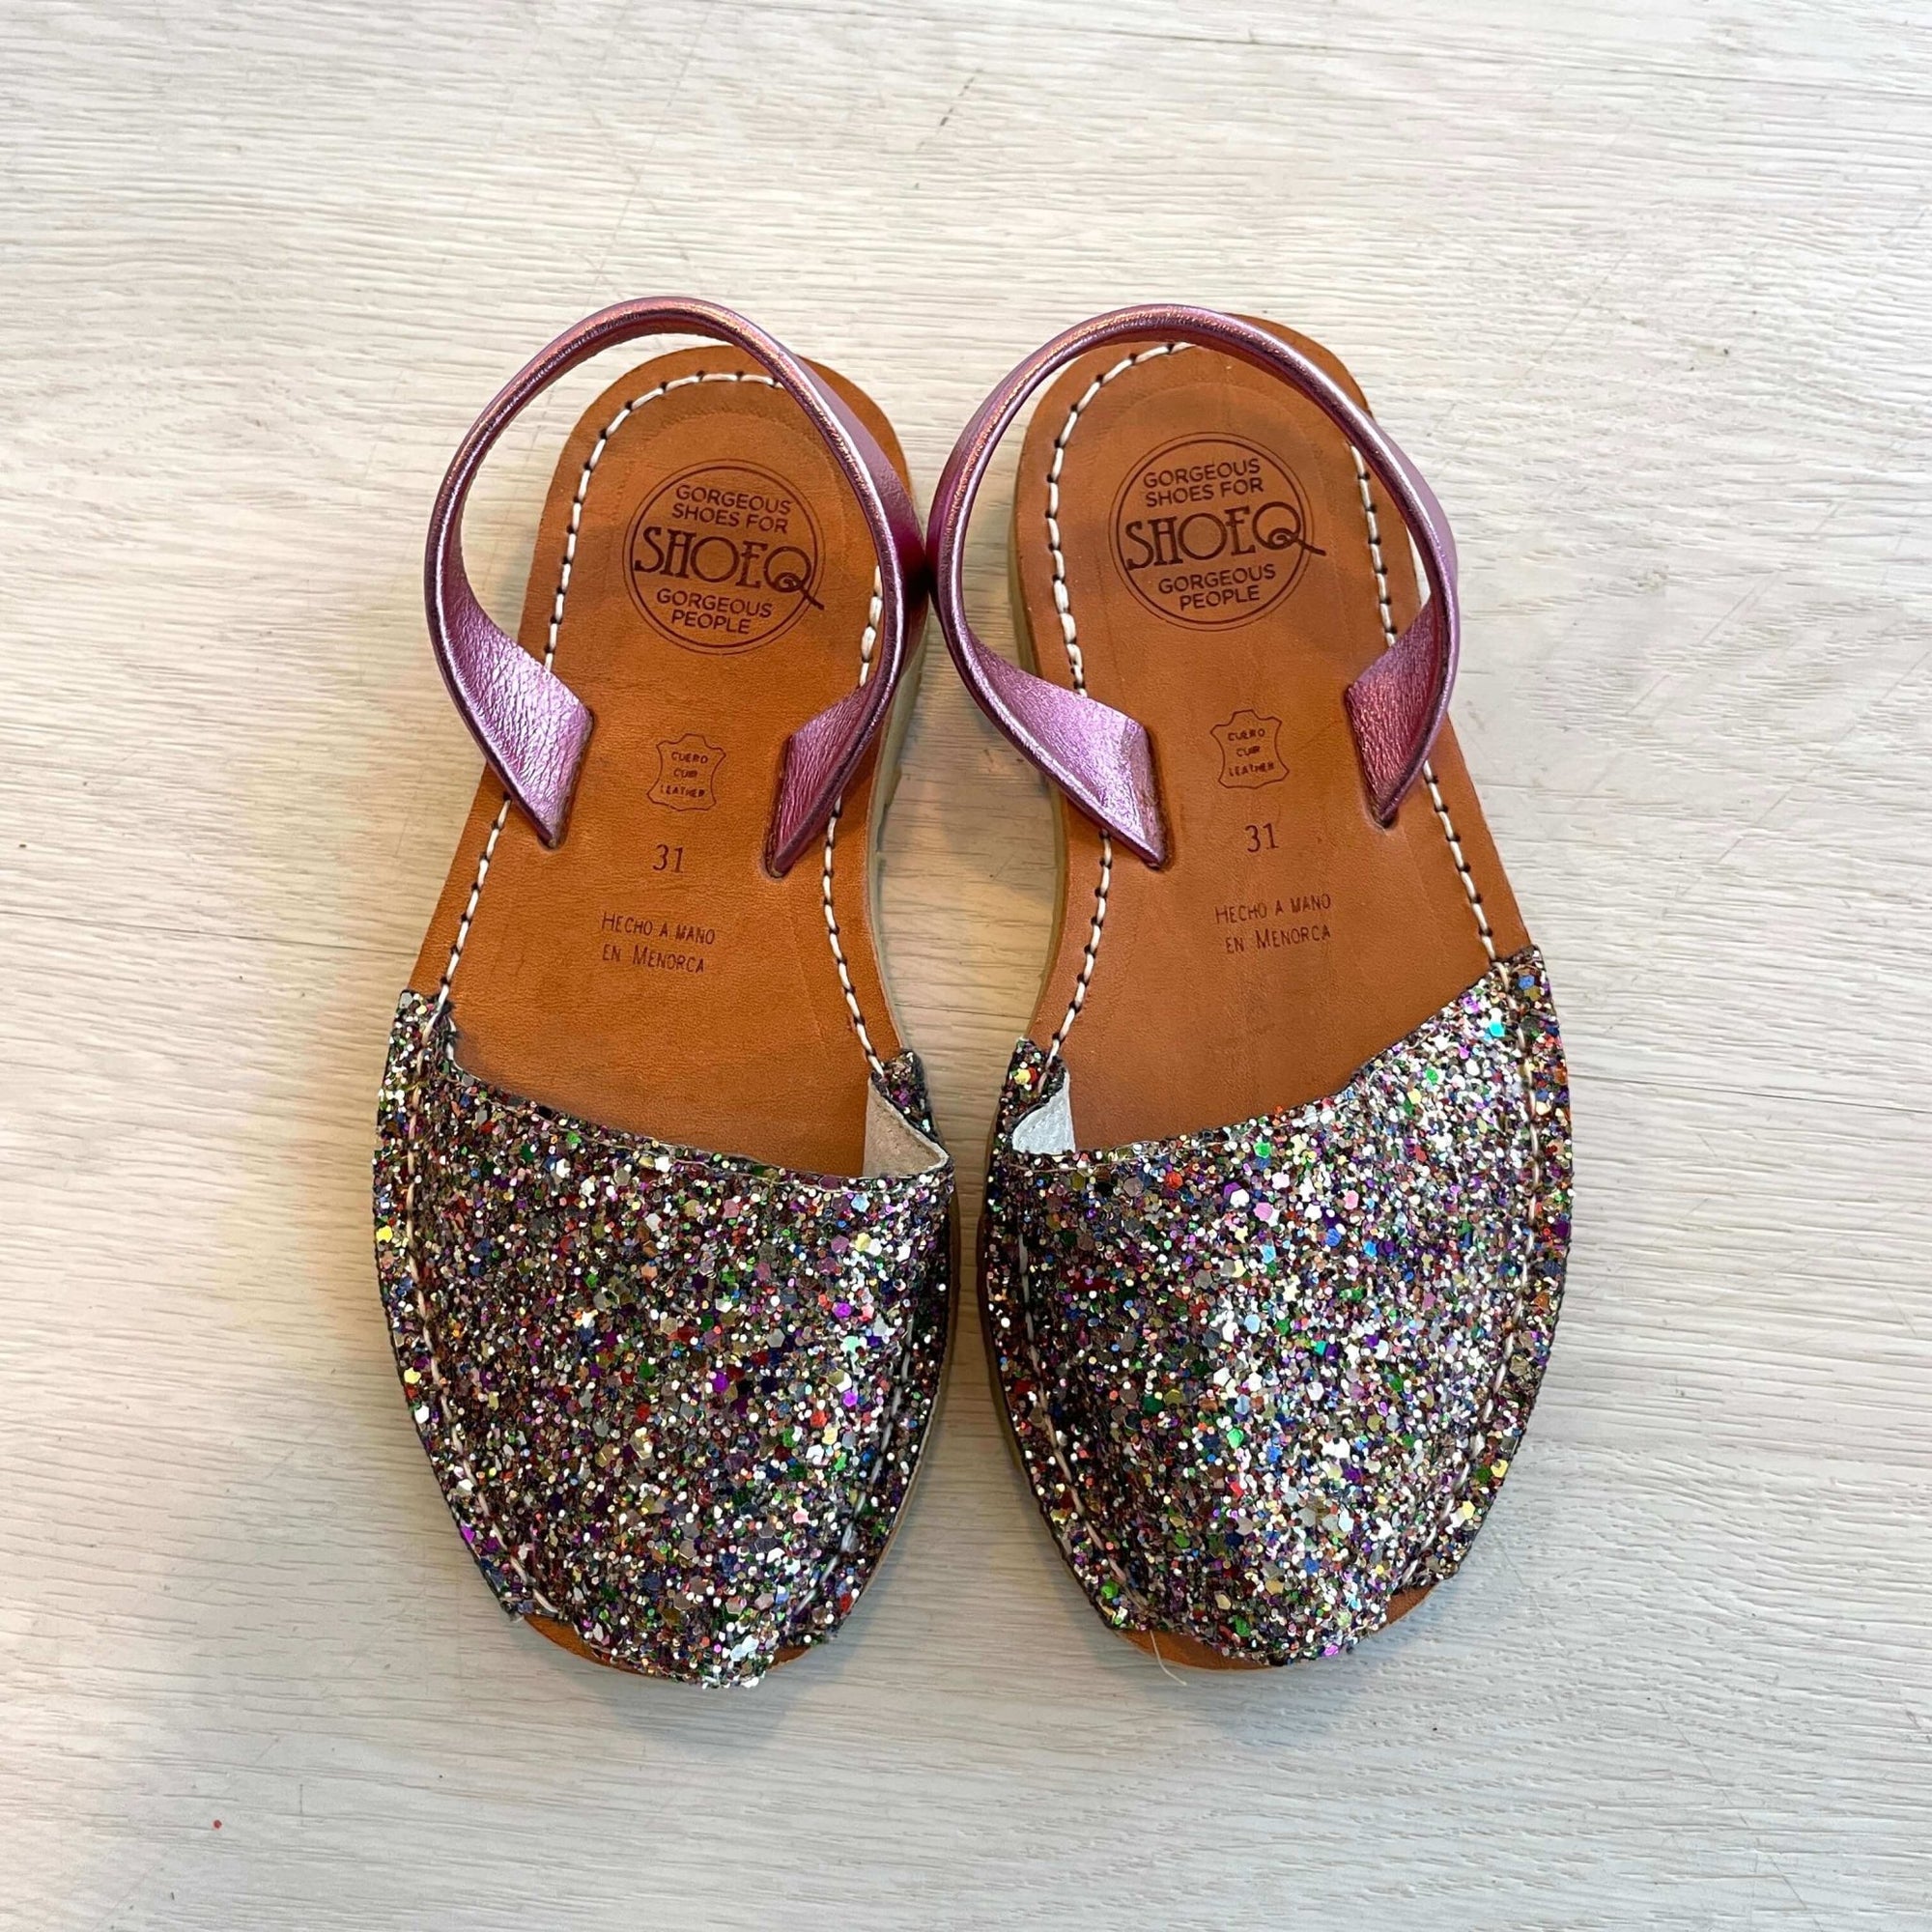 DS - Girls Classic Avarca in Rainbow Pink Glitter - outlet item - Shoeq